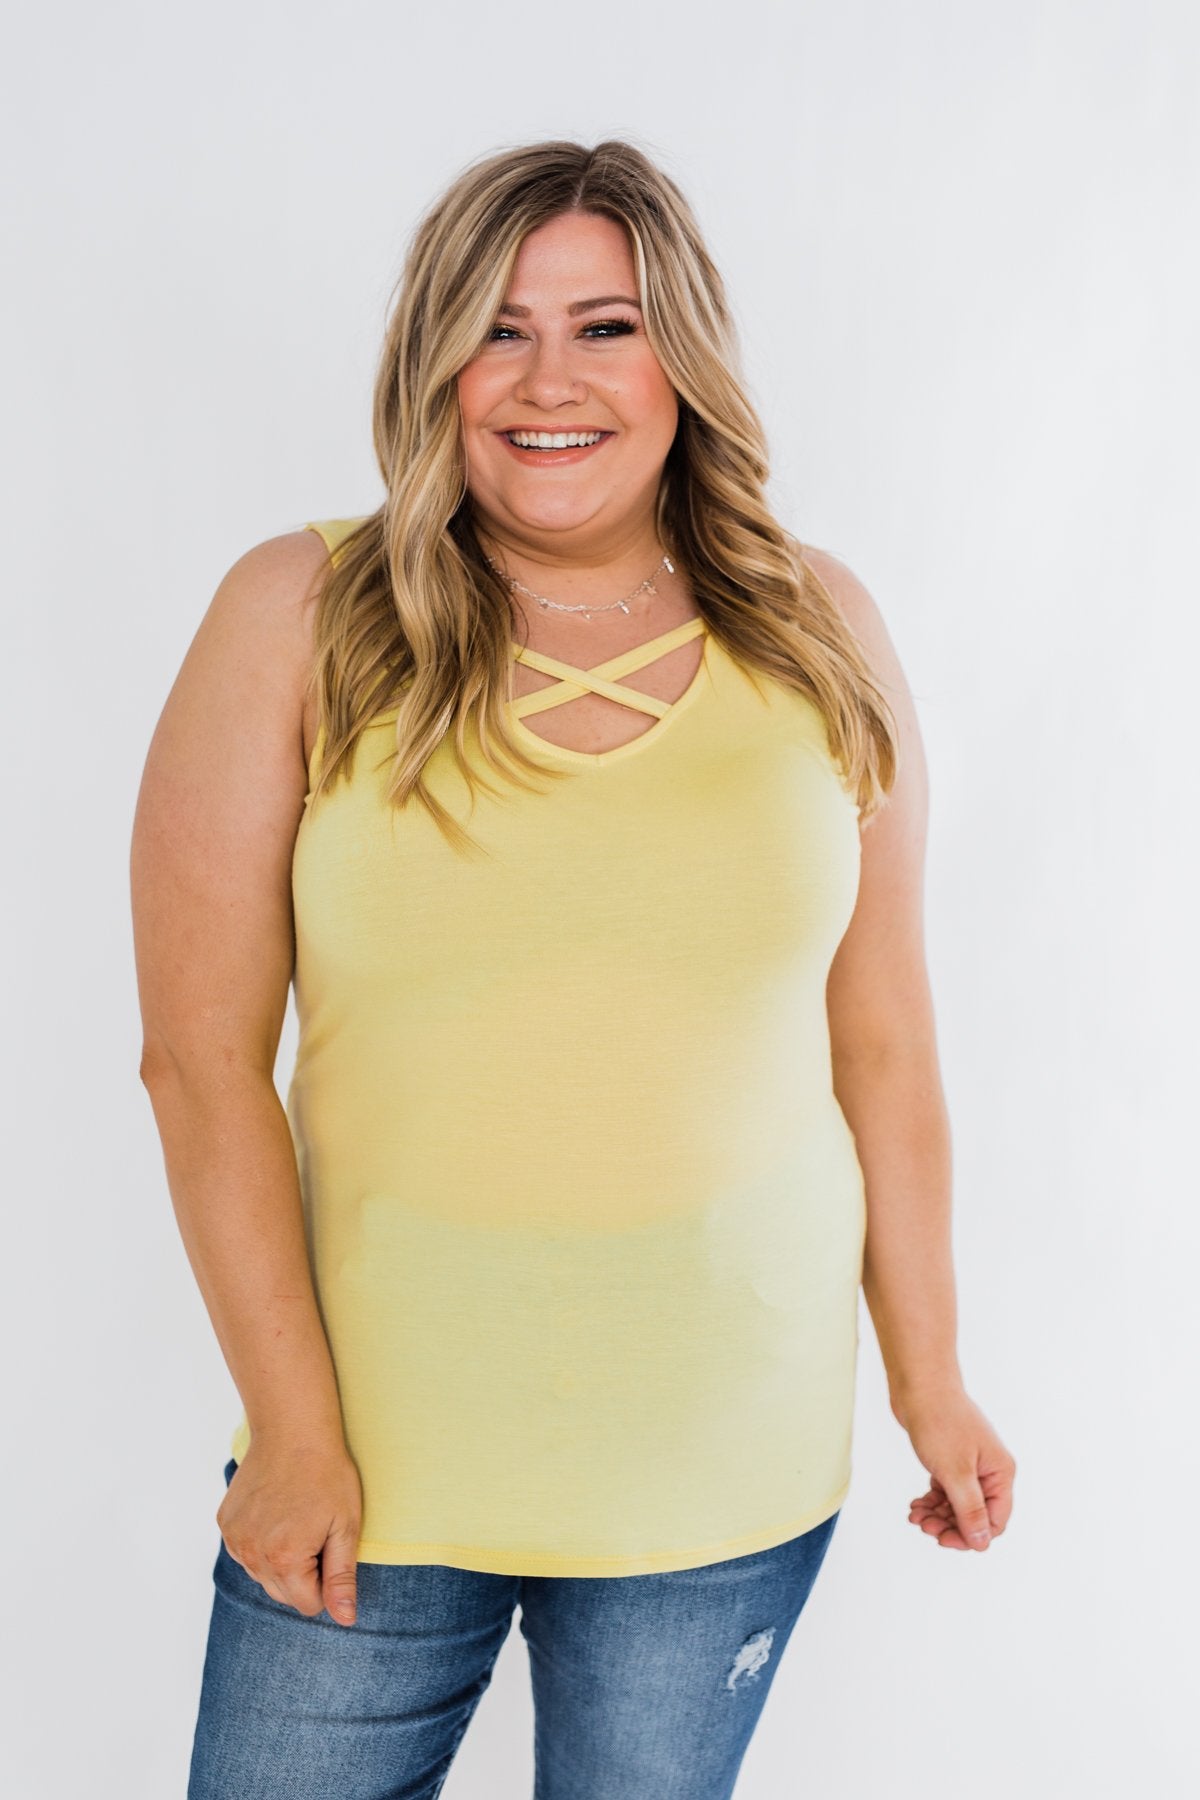 Places to Go Criss Cross Tank Top- Yellow